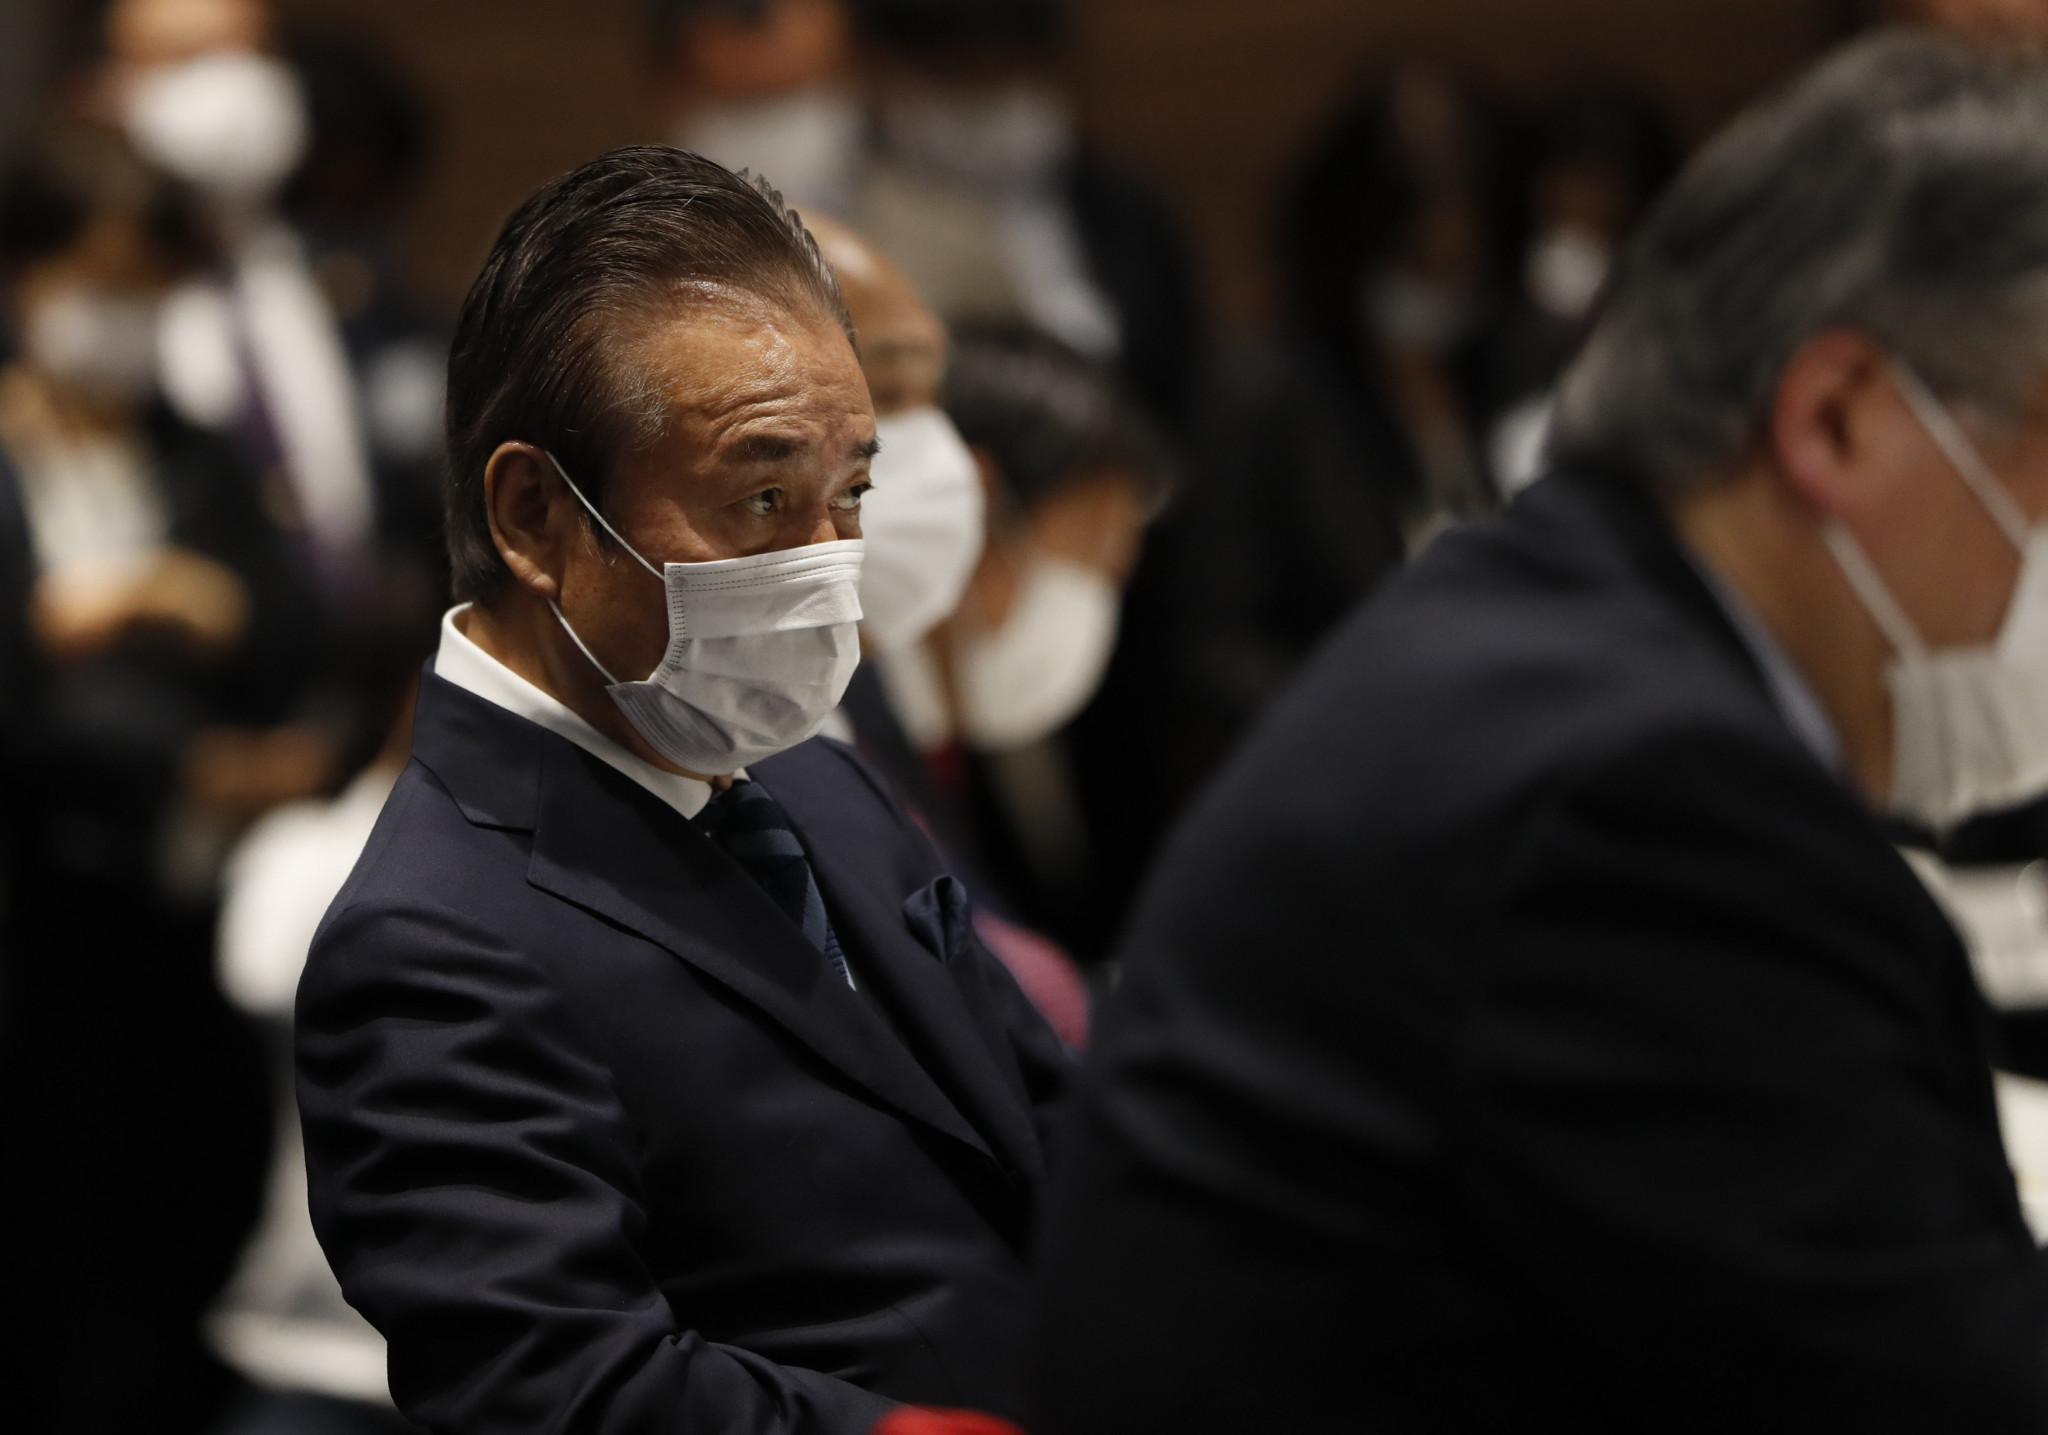 Former Tokyo 2020 Executive Board member Haruyuki Takahashi is accused of receiving bribes ©Getty Images